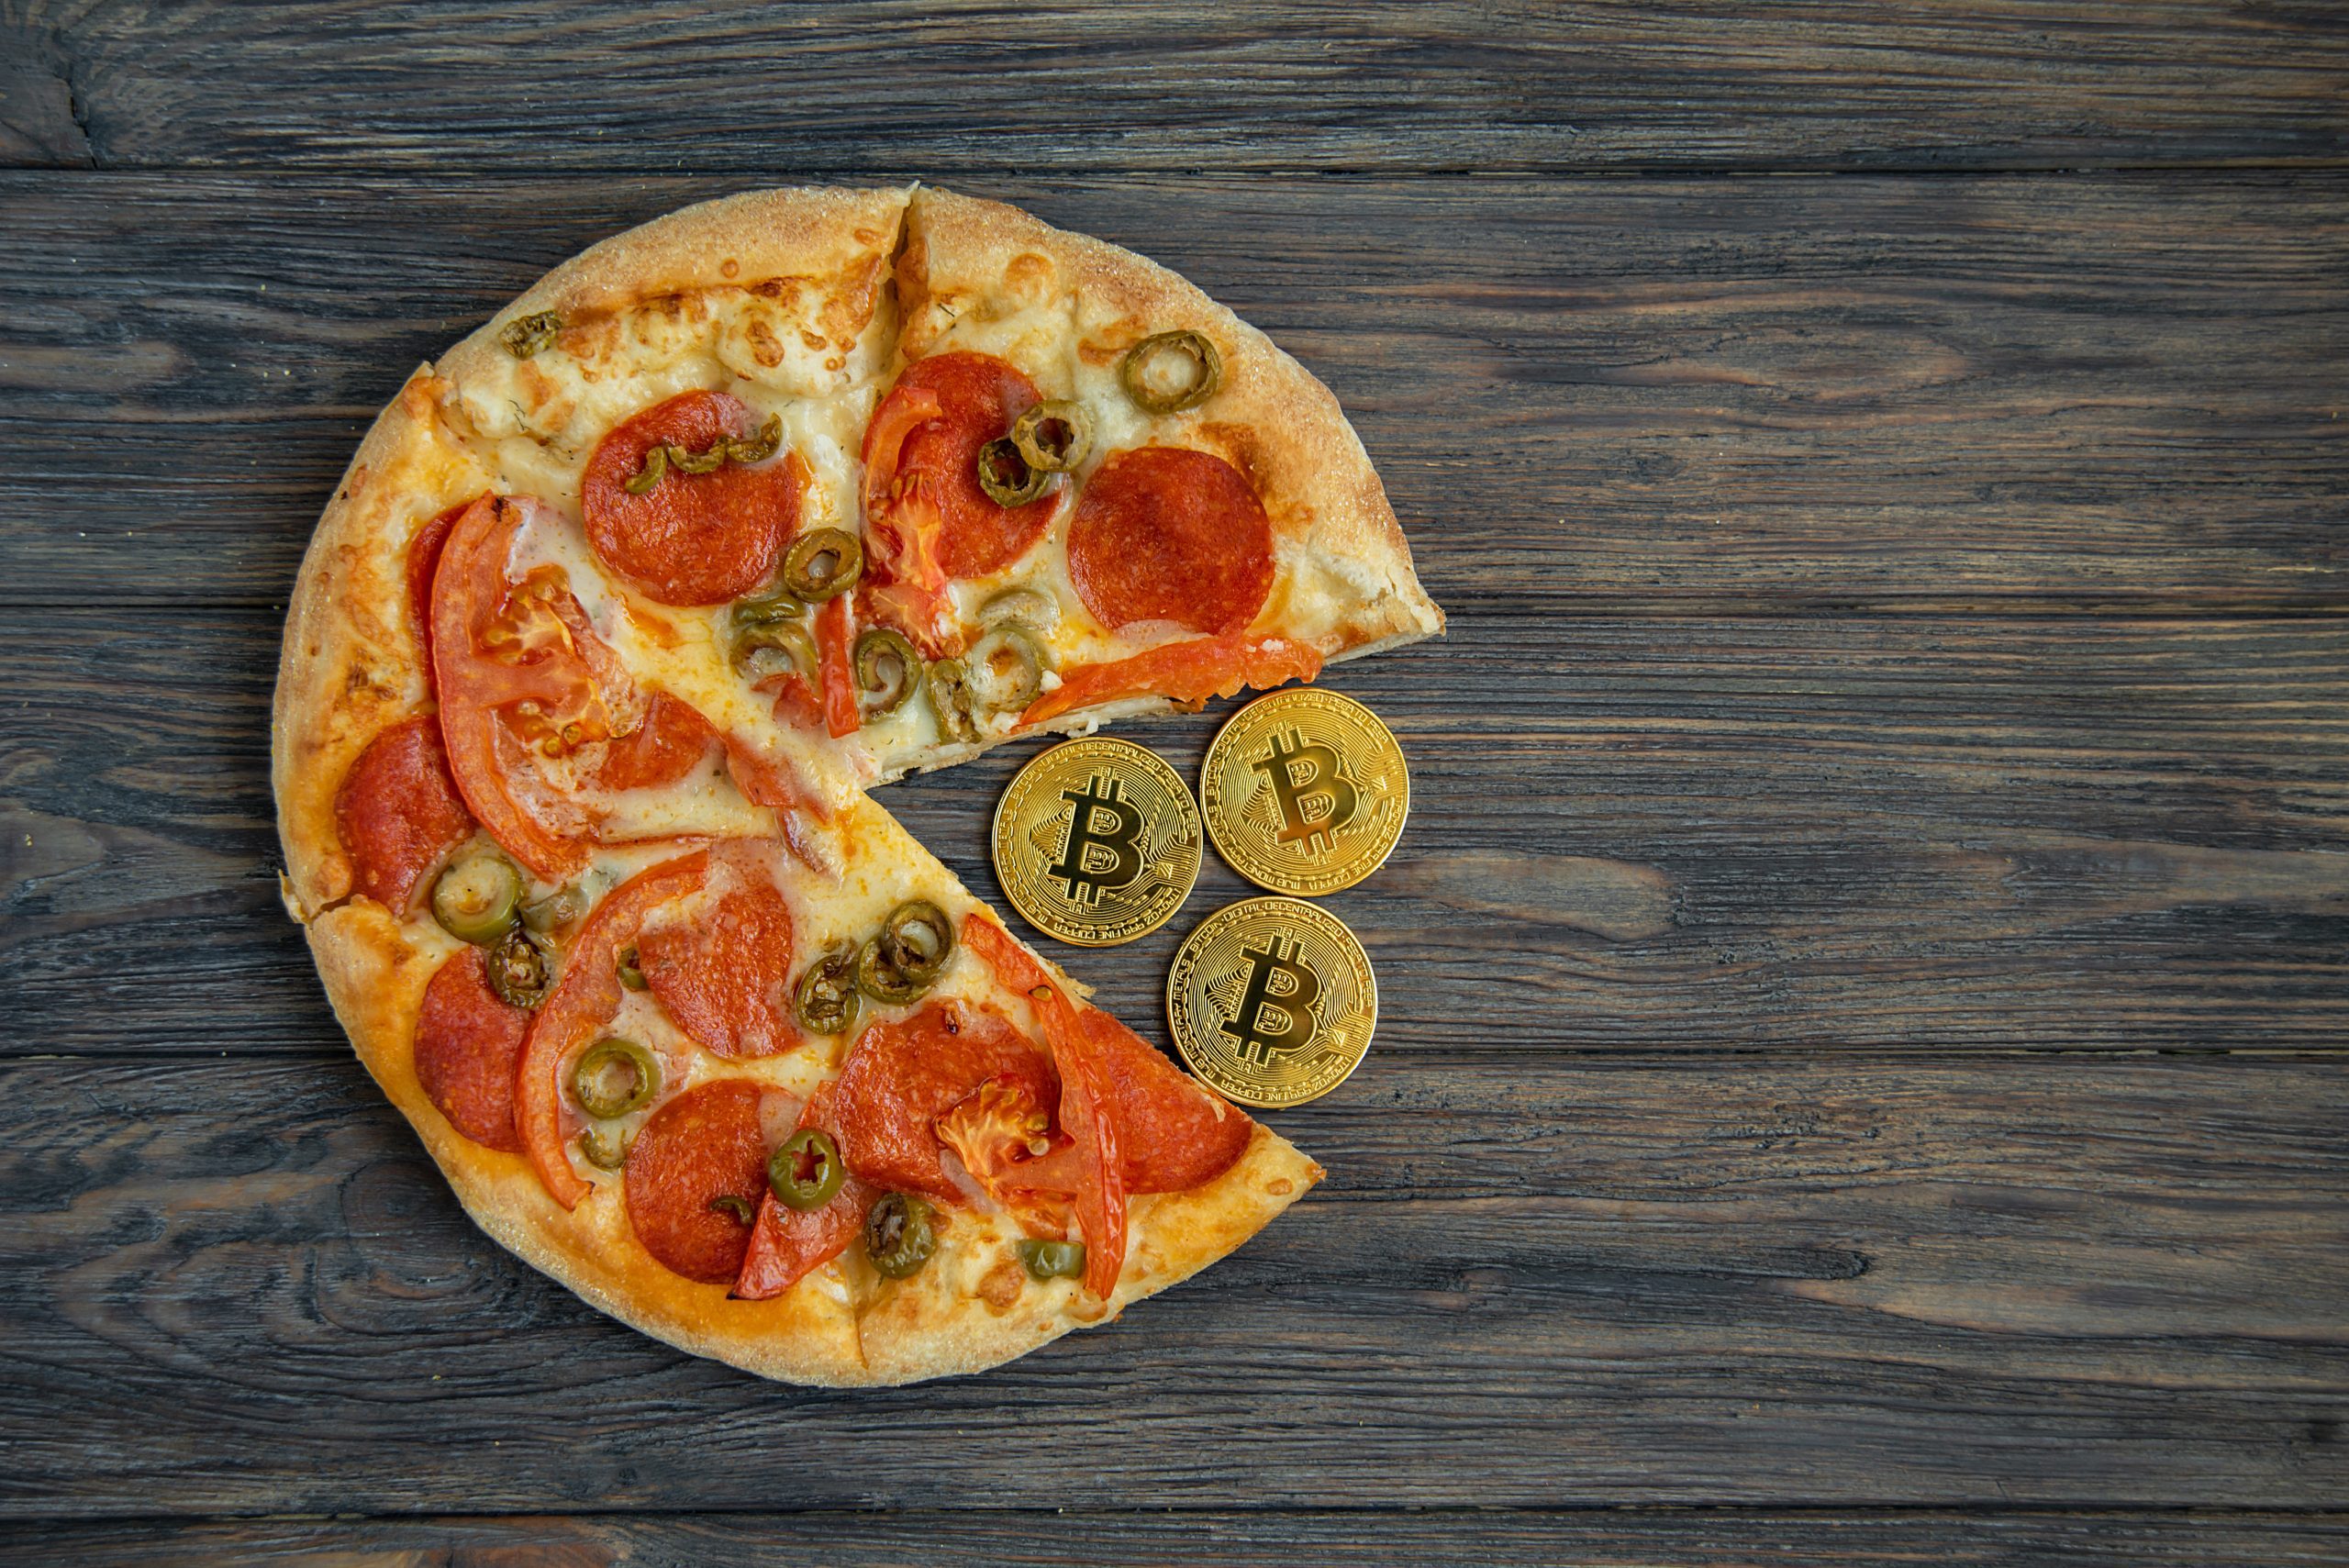 What happened to 10, BTC from the 'Bitcoin pizza' story?